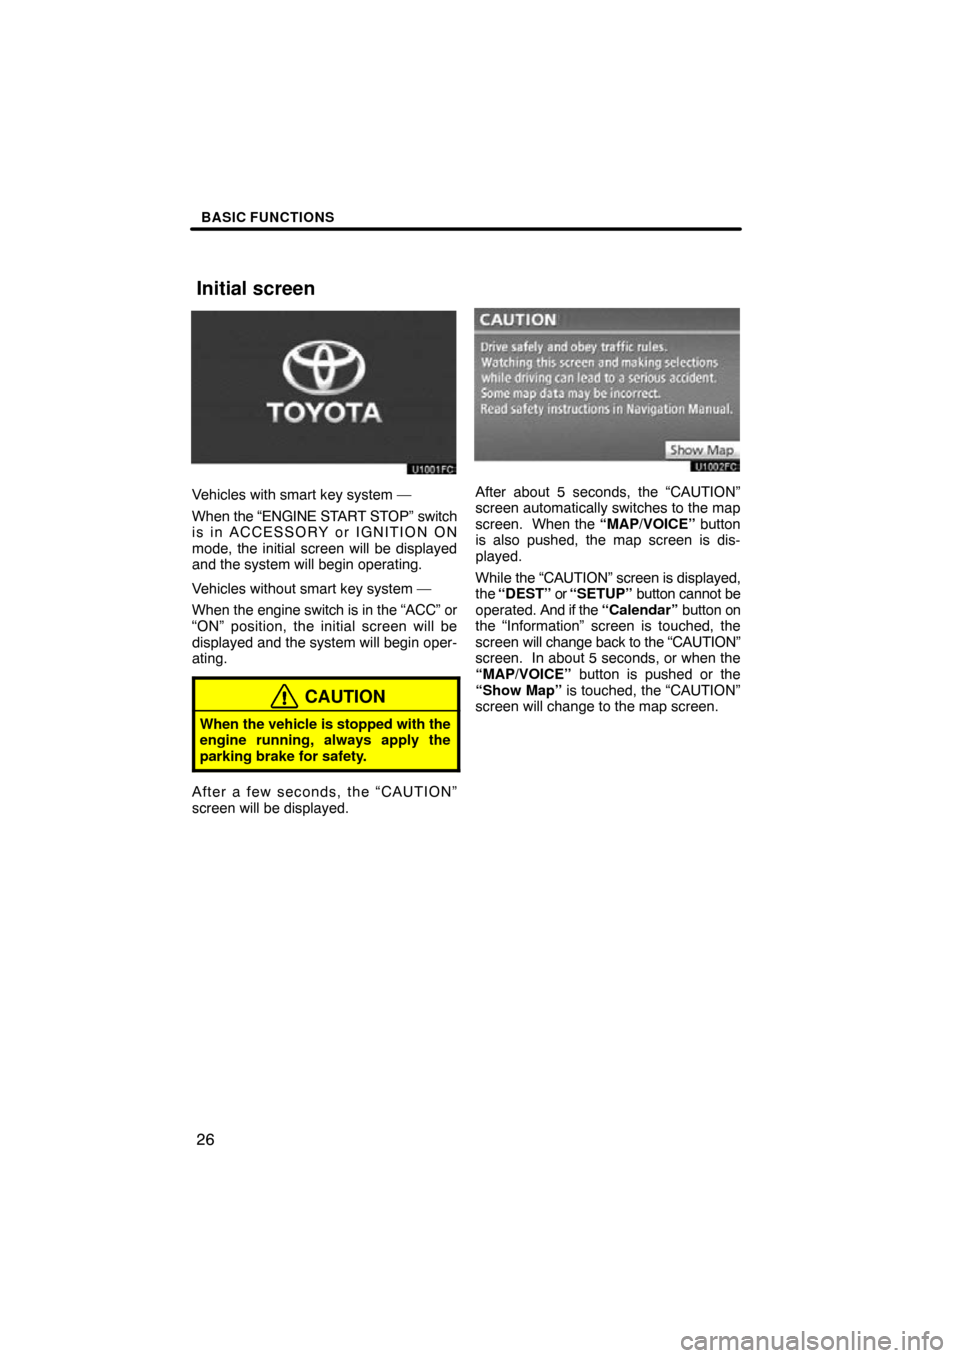 TOYOTA HIGHLANDER 2013 XU50 / 3.G Navigation Manual BASIC FUNCTIONS
26
Vehicles with smart key system —
When the “ENGINE START STOP” switch
is in ACCESSORY or IGNITION ON
mode, the initial screen will be displayed
and the system will begin operat